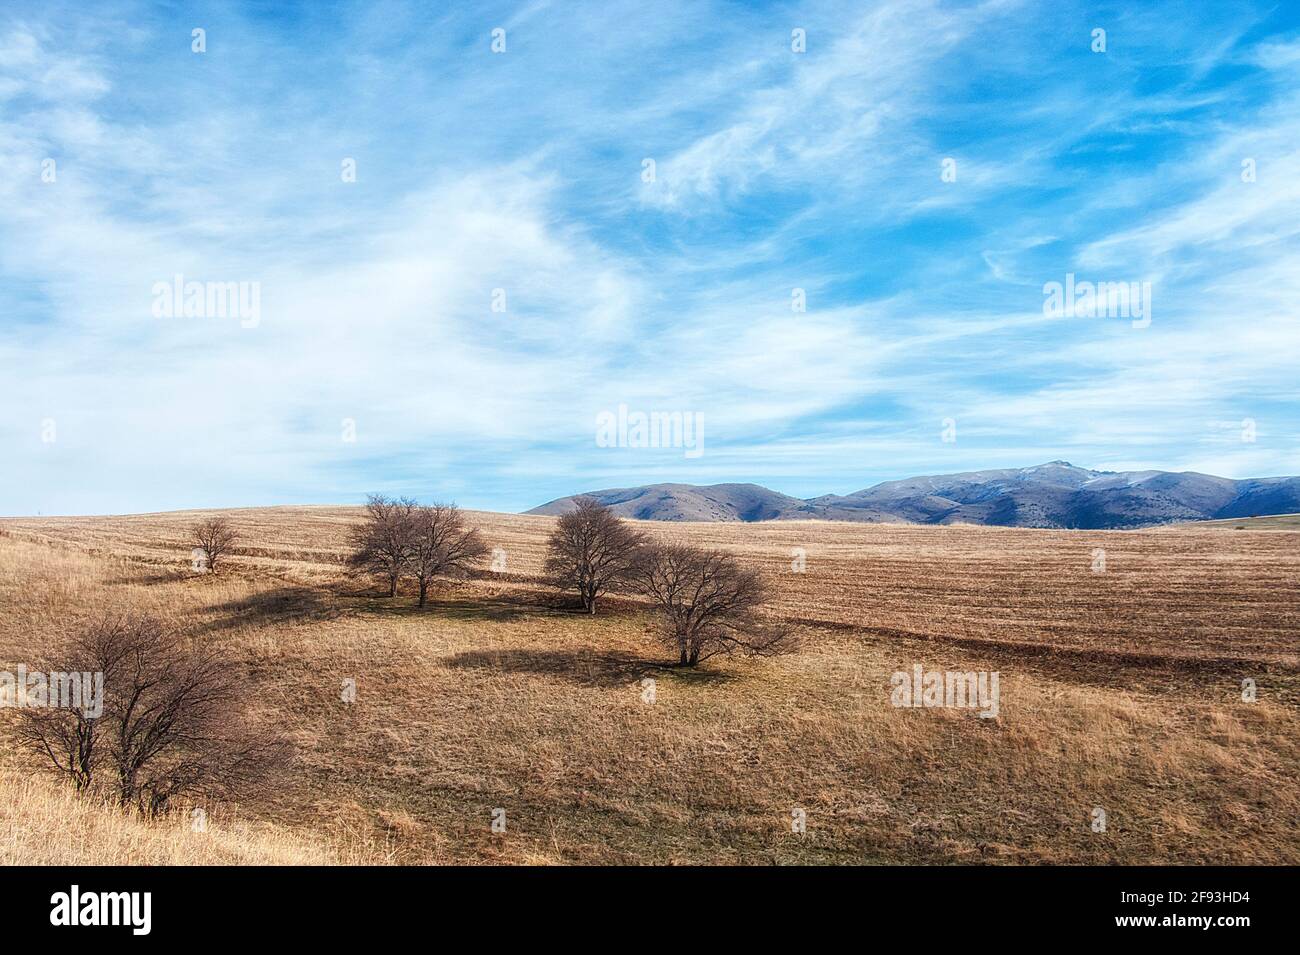 Landscape with autumn trees without leaves amid yellow wilted grass and blue sky Stock Photo